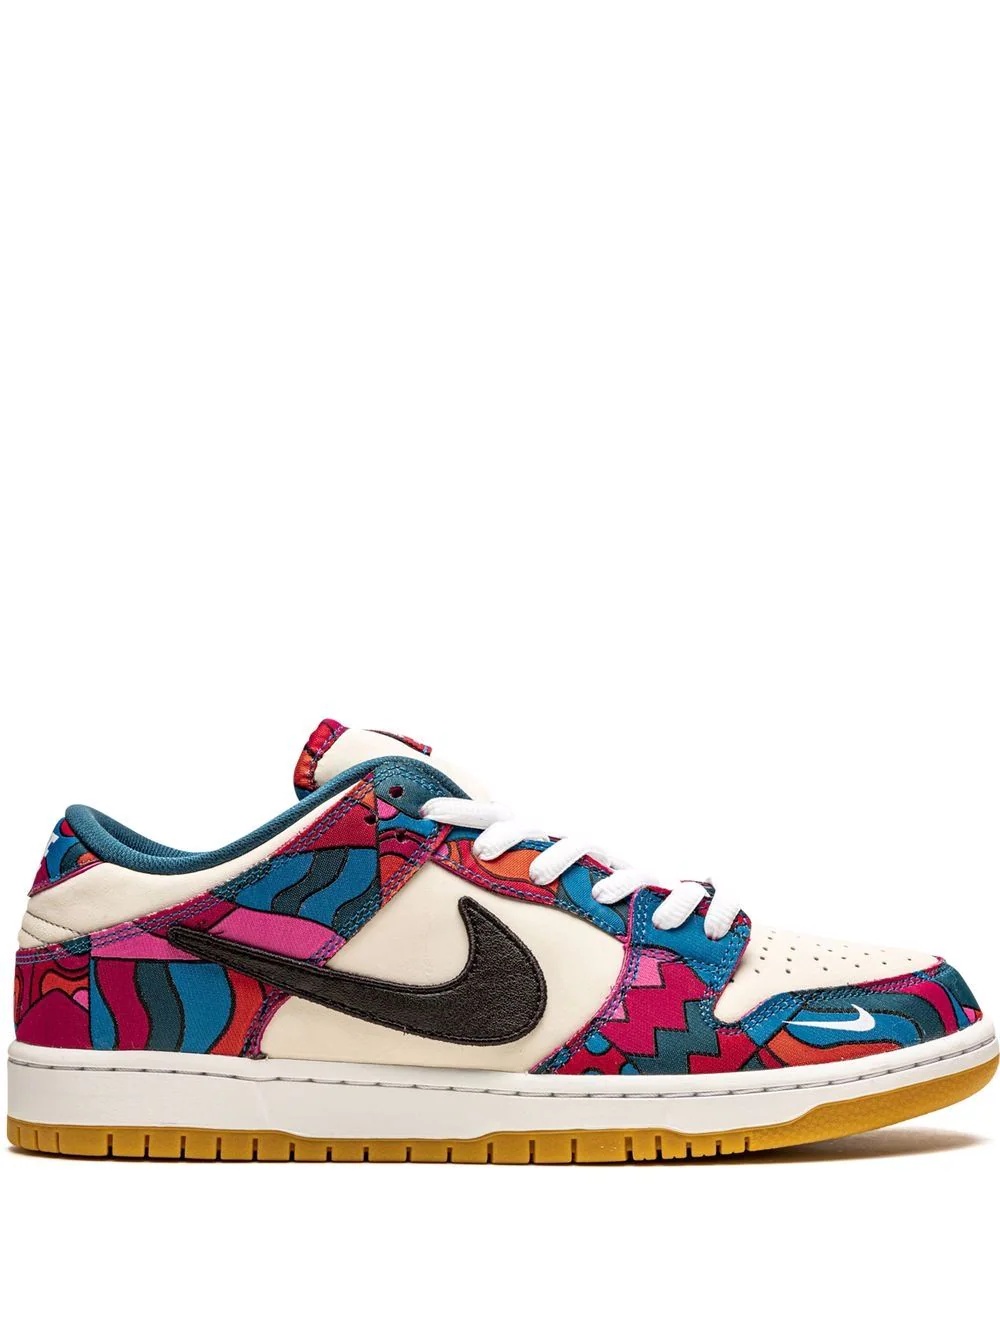 x Parra Dunk Low SB "Abstract Art" sneakers - 1